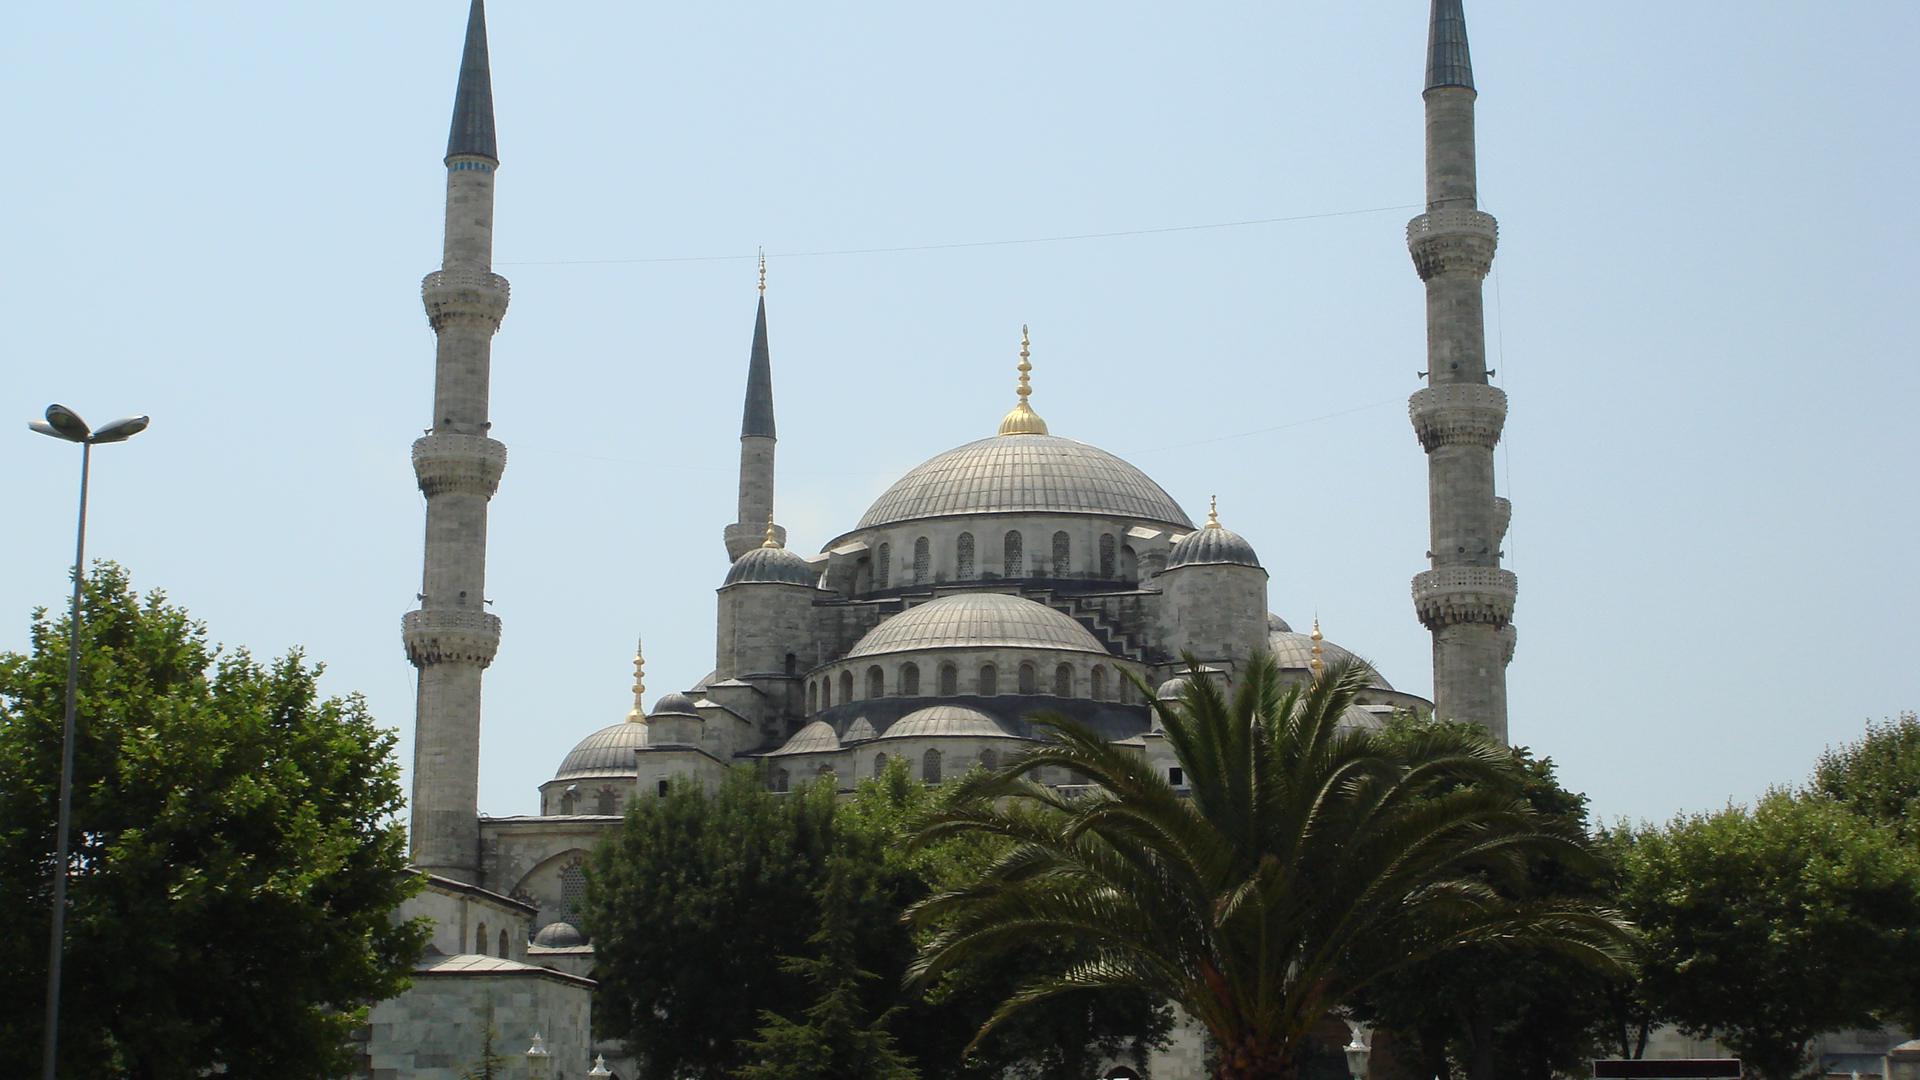 Sultan Ahmed Mosque in Istanbul (7)